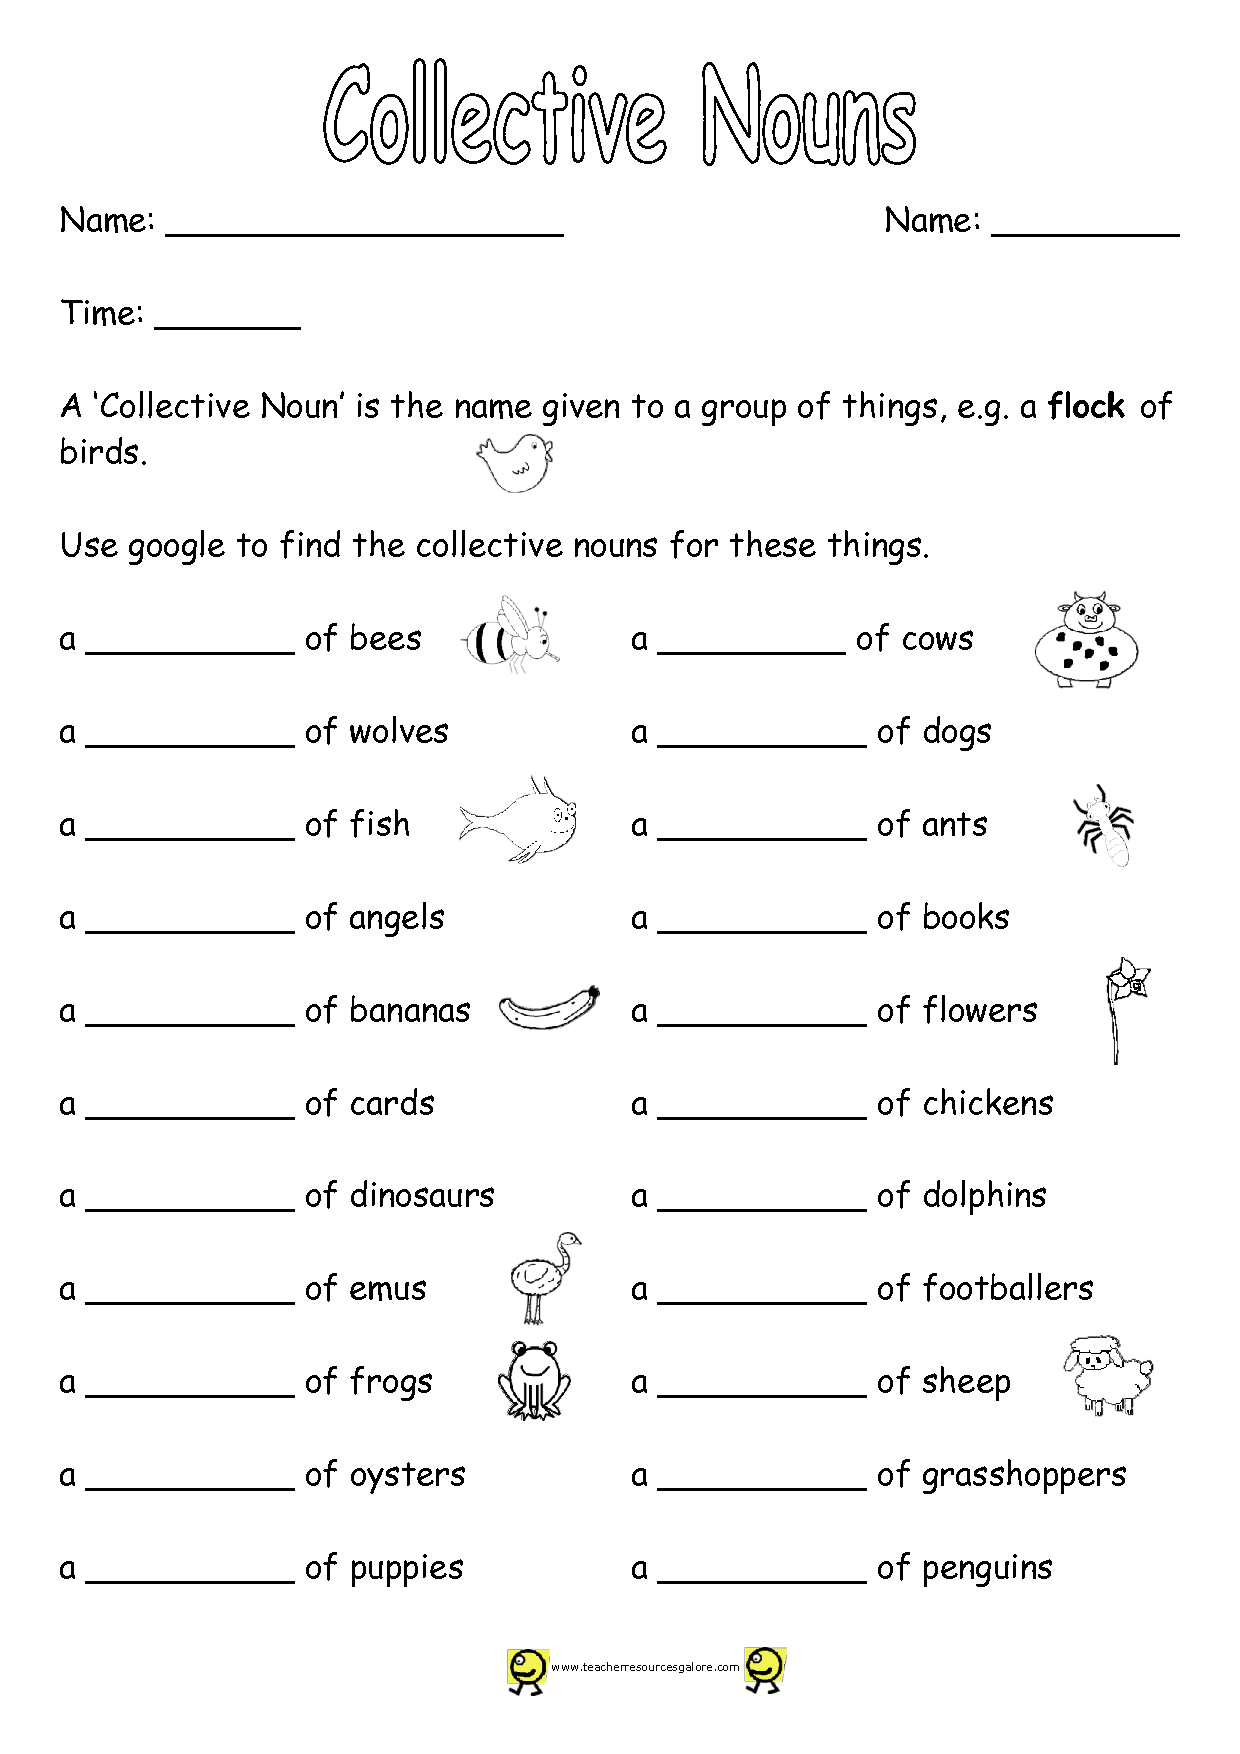 18-best-images-of-collective-nouns-2nd-grade-worksheet-collective-nouns-worksheet-irregular